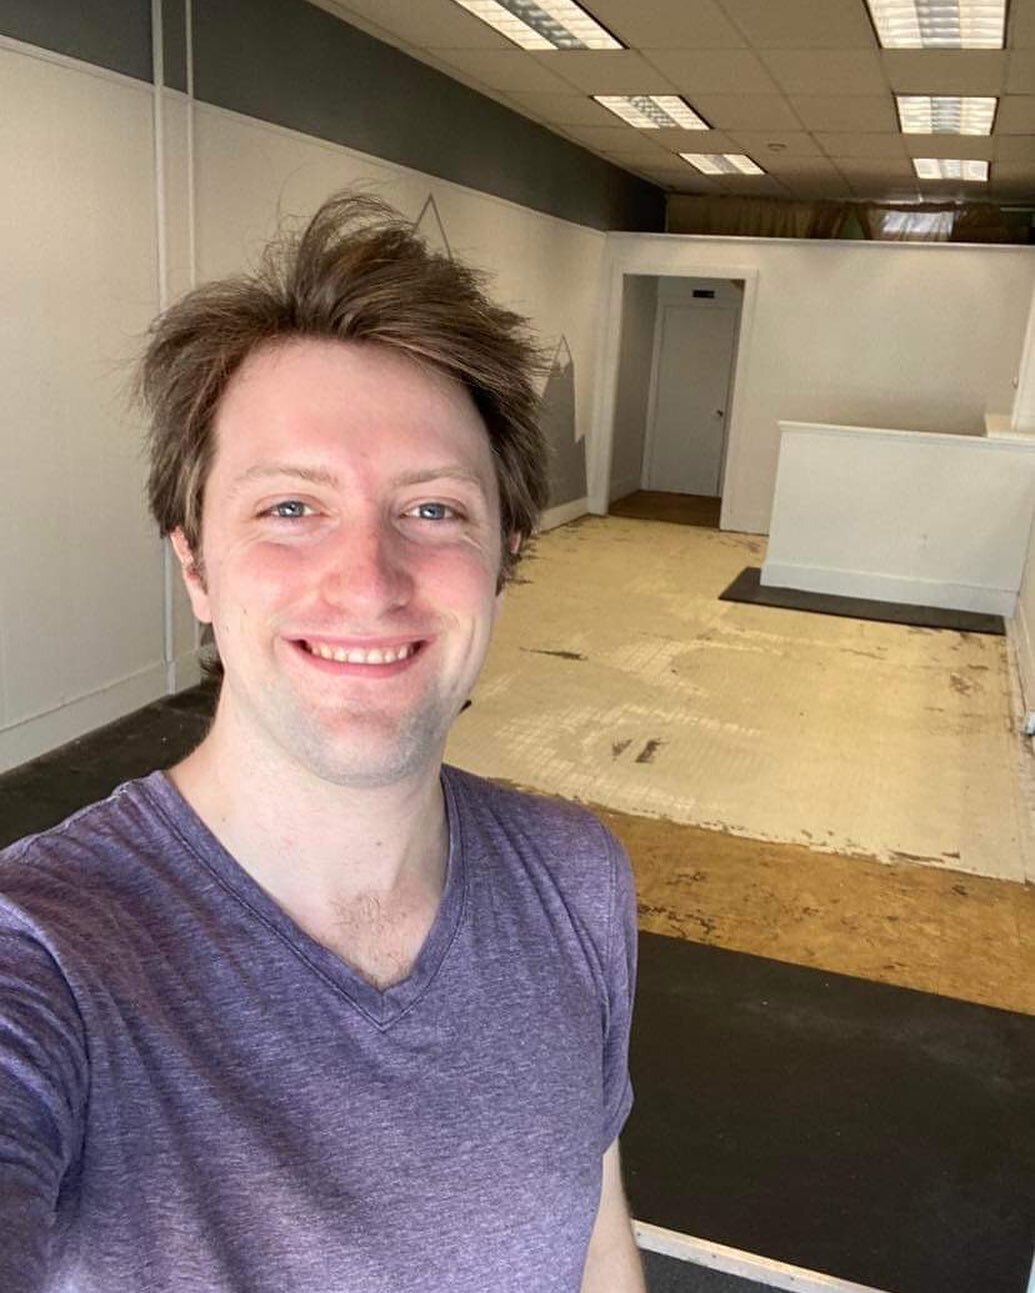 We can&rsquo;t wait to renovate this space and make it our own! Set building is the same as redoing a space right? 

&hellip;.
#maynardbusinessalliance #setbuilding #setbuild #smallbusiness #maynardma #concordma #sudburyma #localmusicians #localbusin